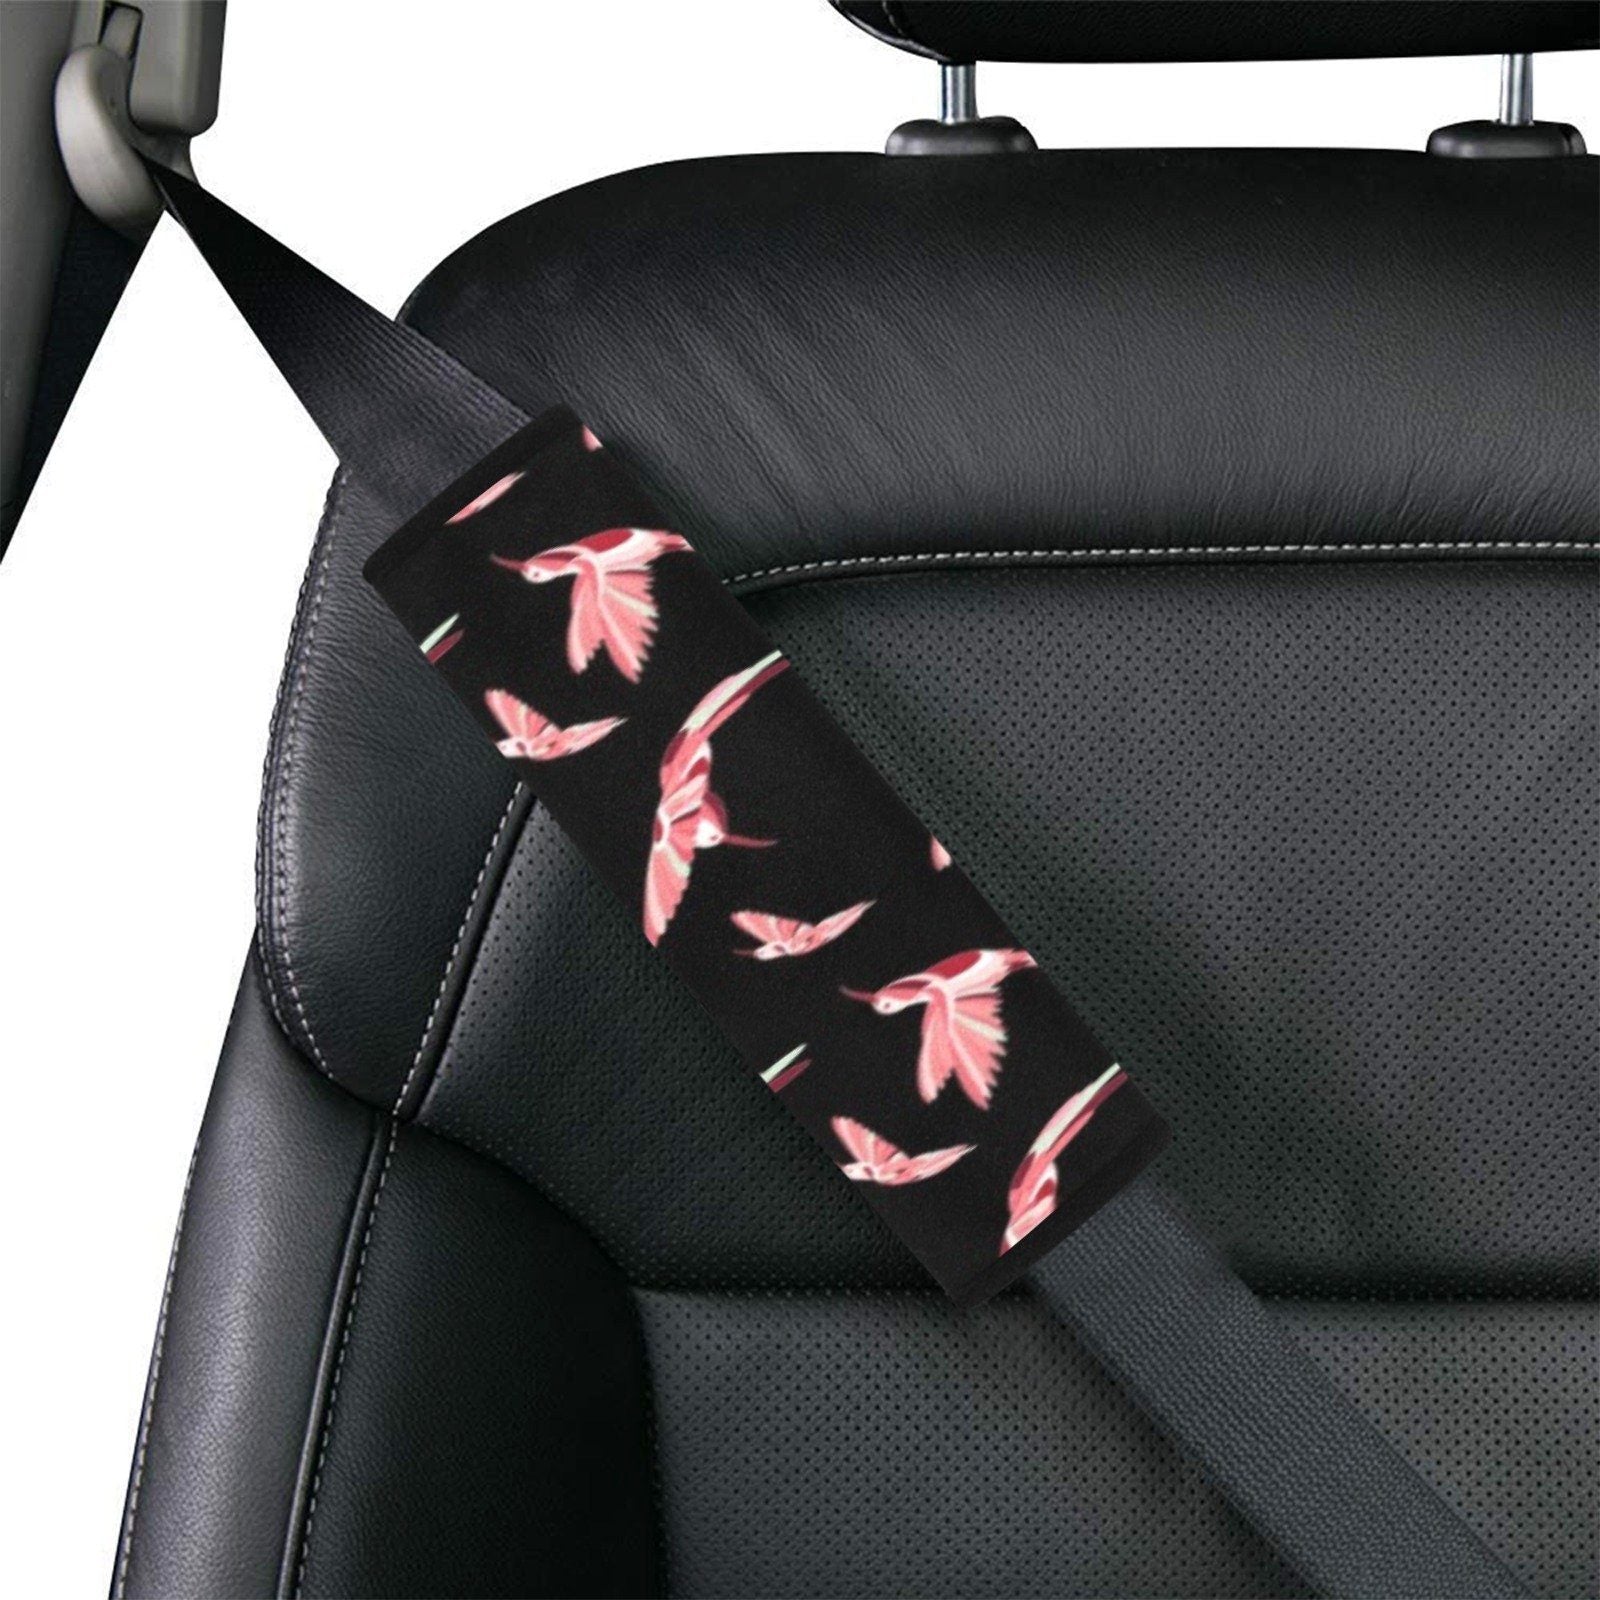 Strawberry Black Car Seat Belt Cover 7''x12.6'' (Pack of 2) Car Seat Belt Cover 7x12.6 (Pack of 2) e-joyer 